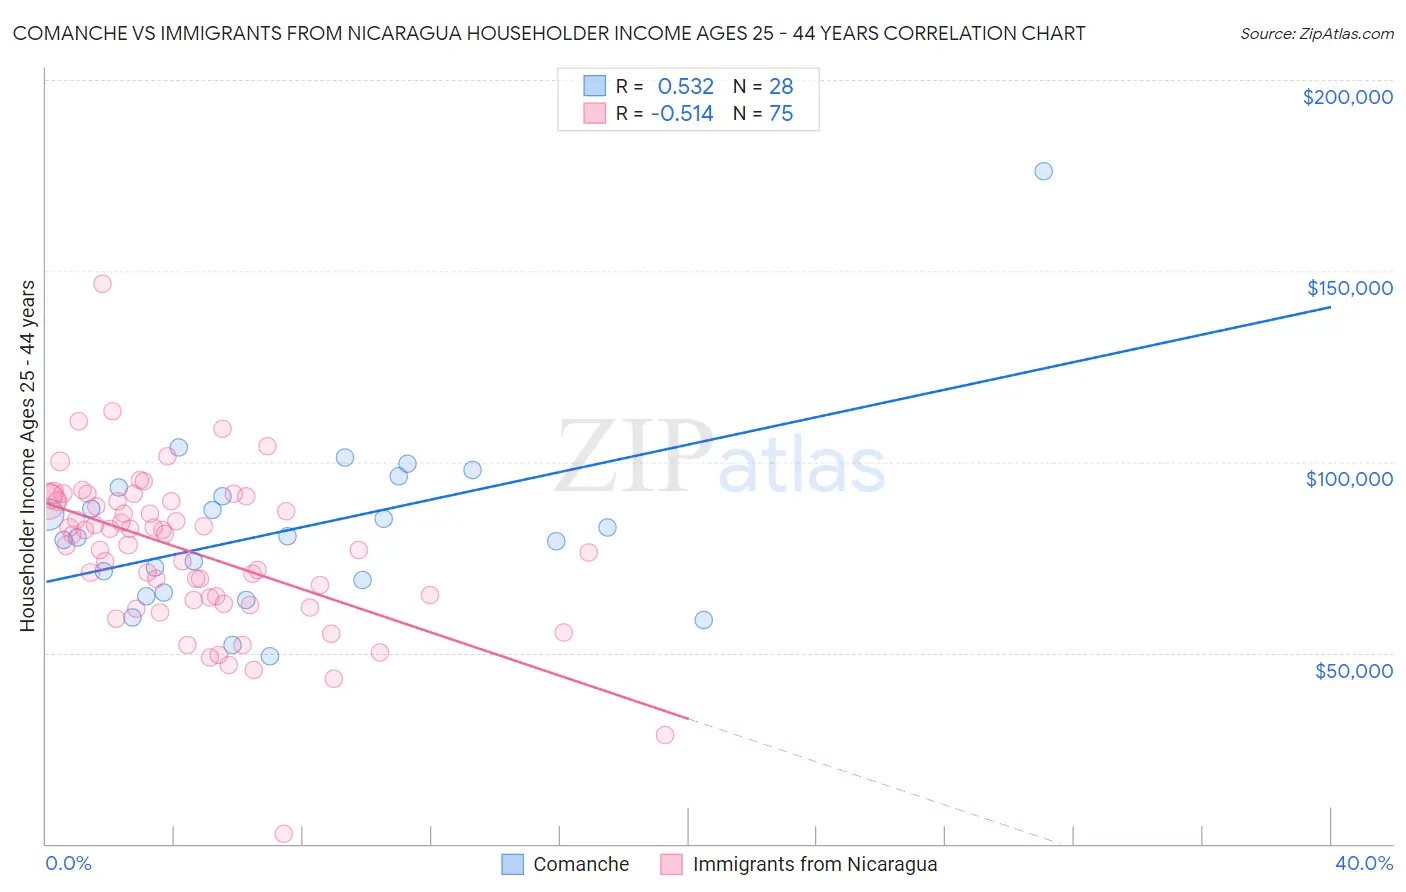 Comanche vs Immigrants from Nicaragua Householder Income Ages 25 - 44 years